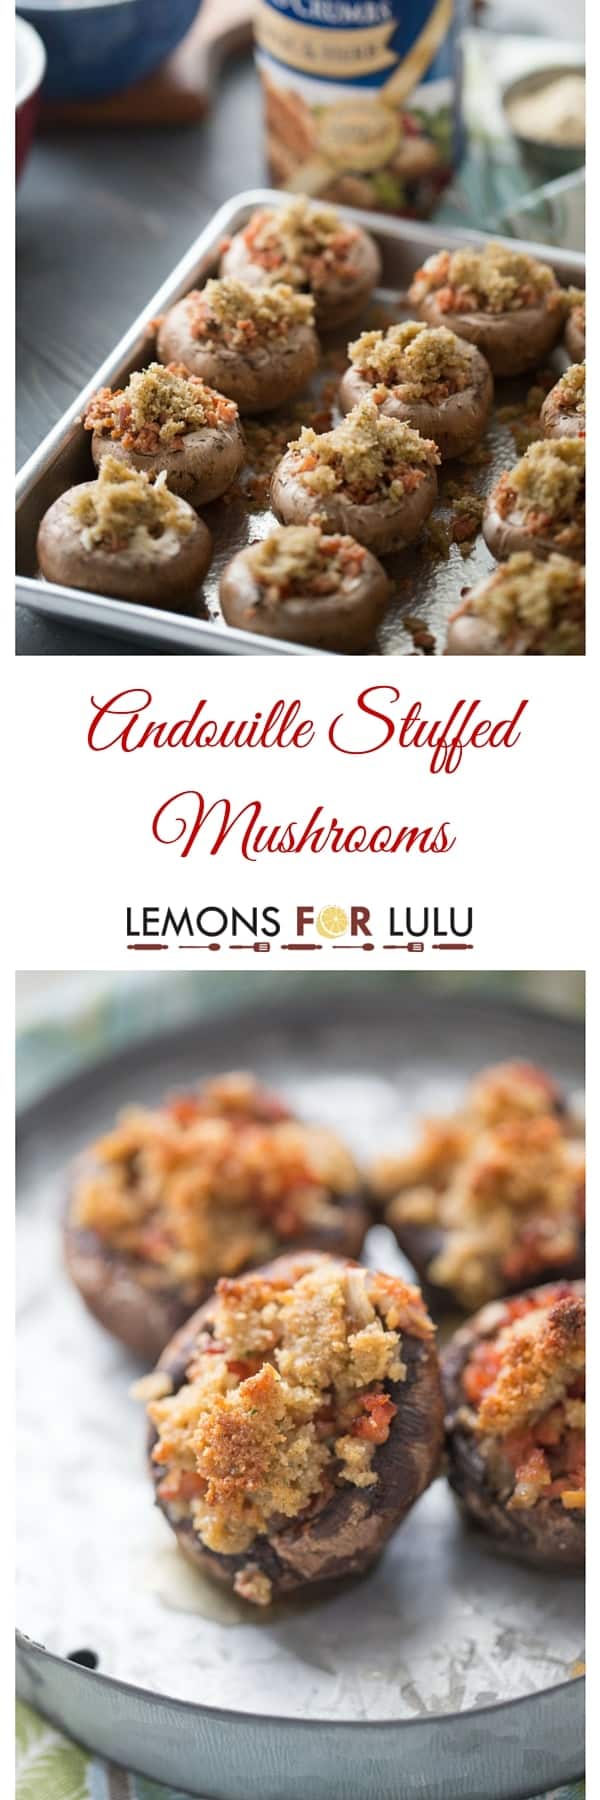 This easy stuffed mushroom recipe is easy and quick! Andouille sausage, veggies and cheese fill mushrooms caps then get topped with a buttery breadcrumb topping! This is party food at it’s best! lemonsforlulu.com